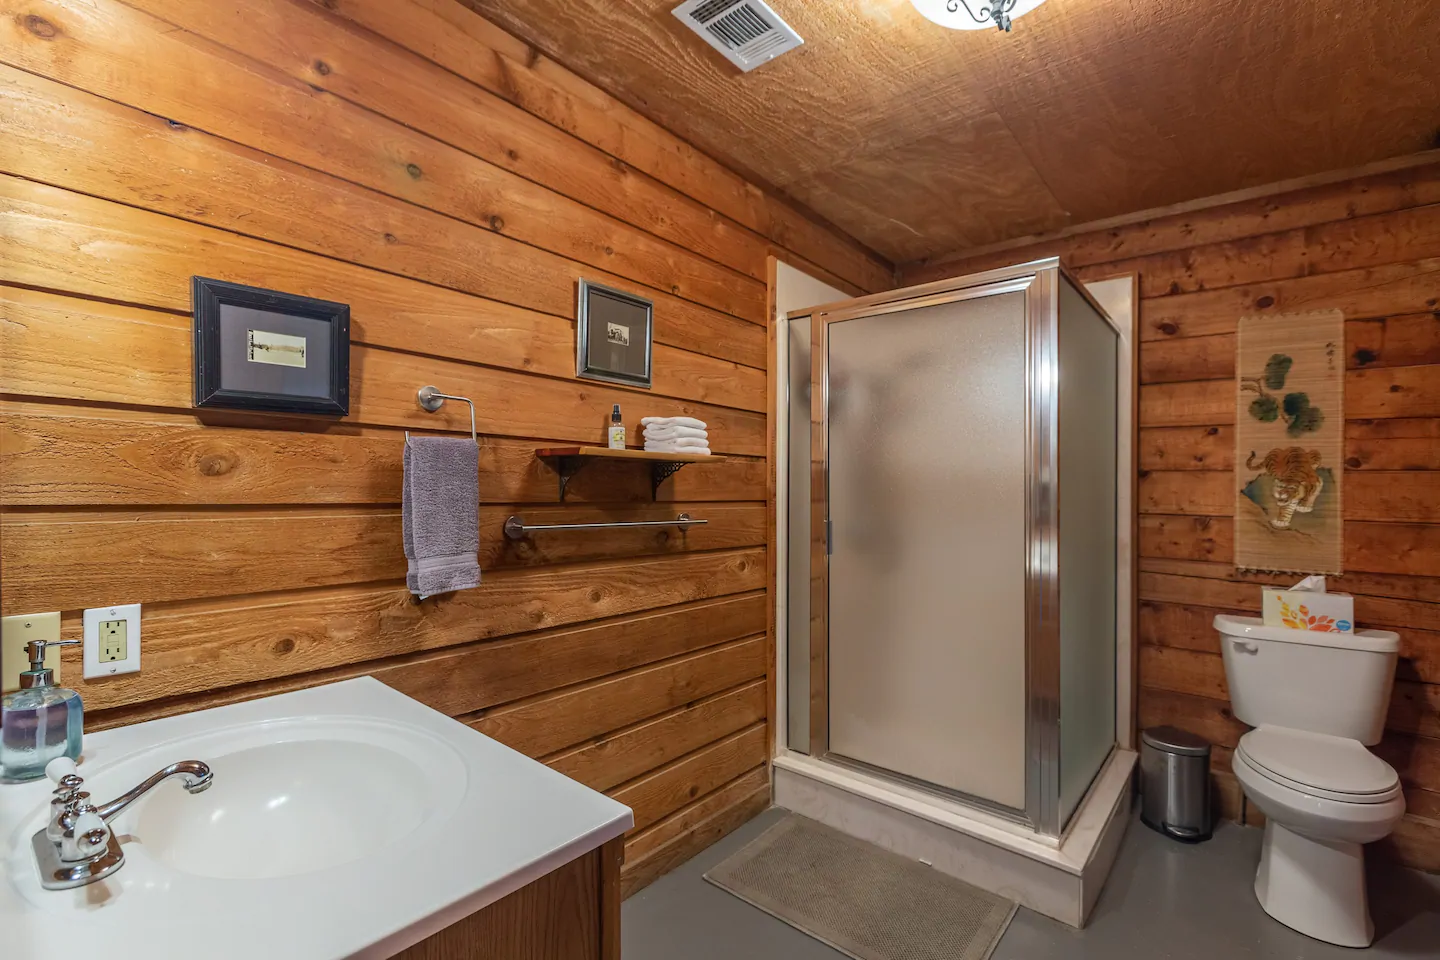 Spacious bathroom with walk-in shower.